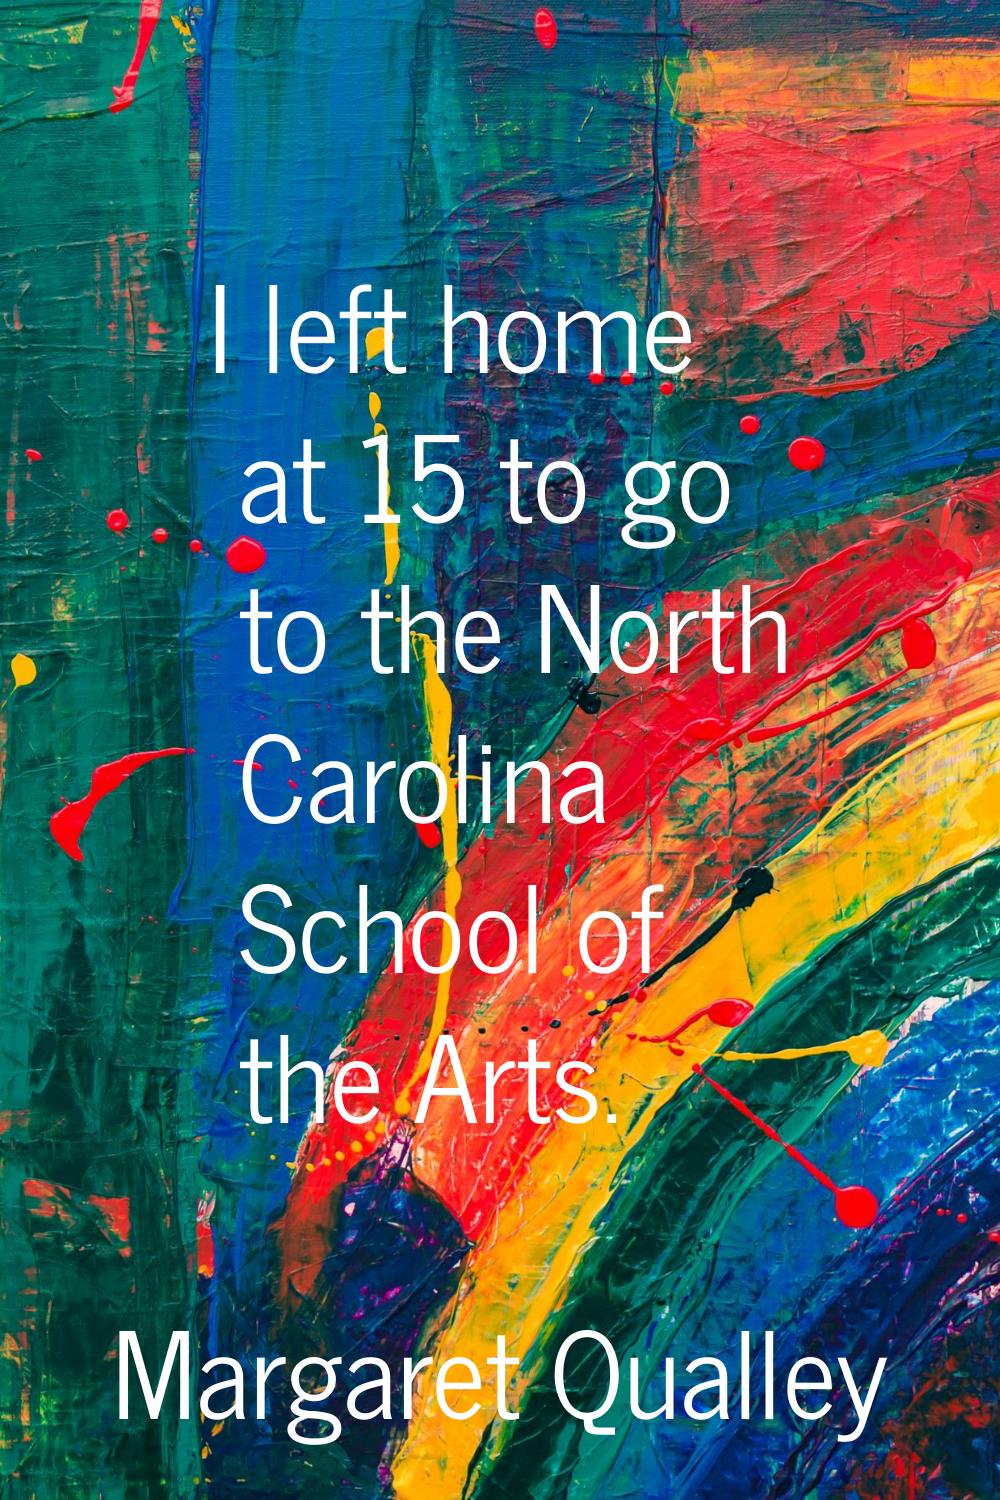 I left home at 15 to go to the North Carolina School of the Arts.